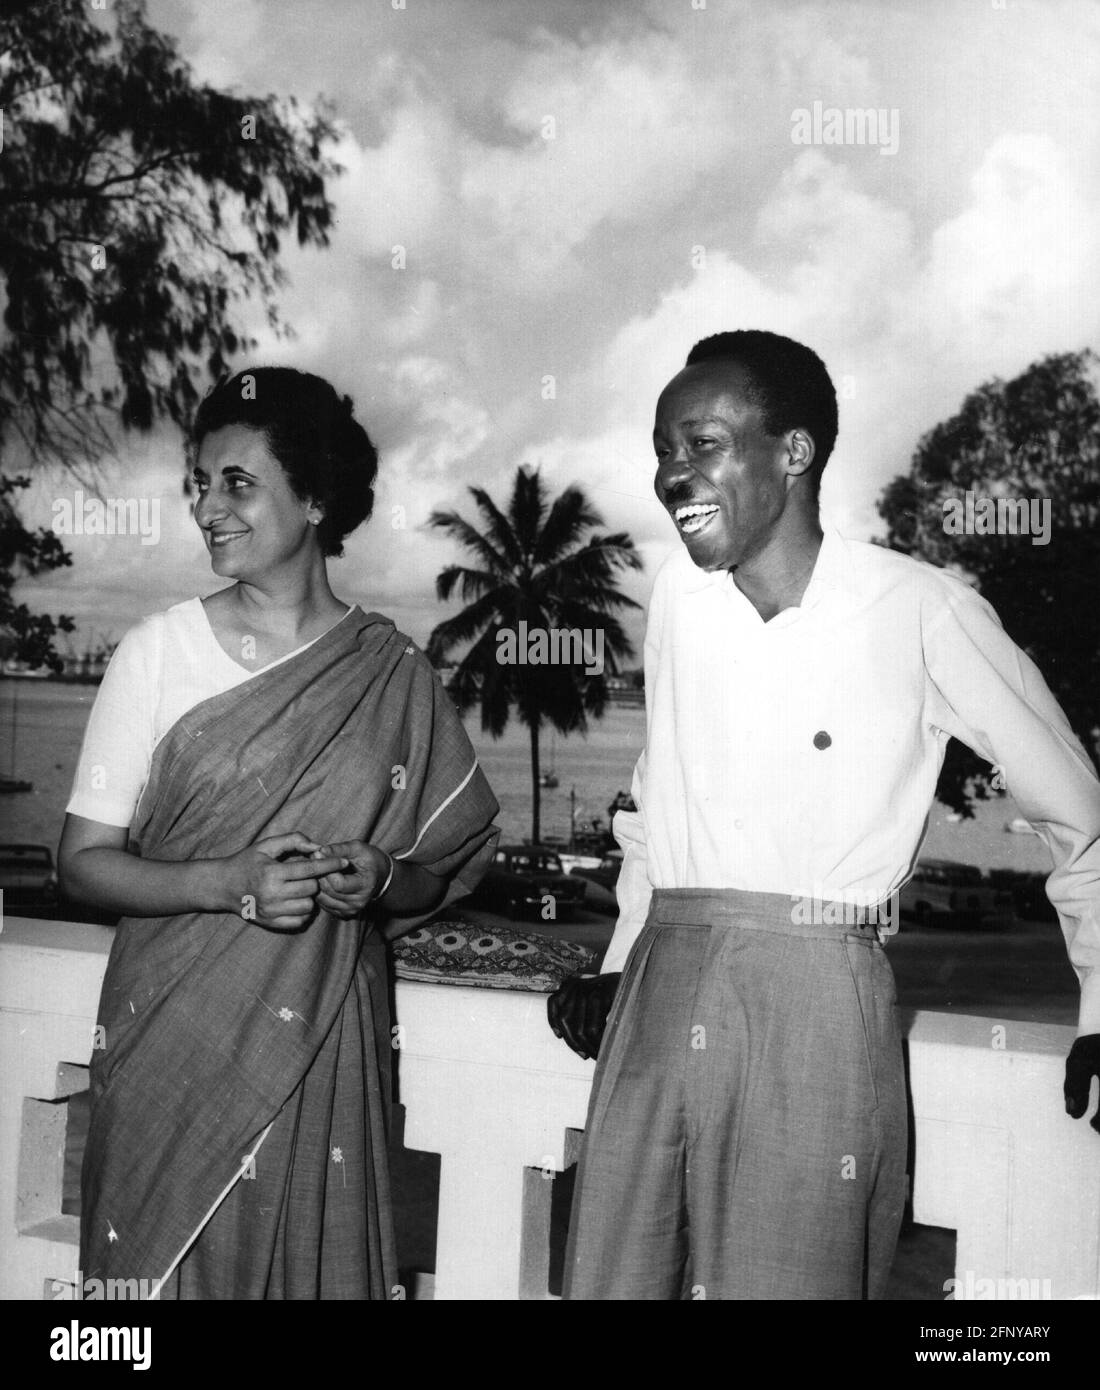 Gandhi, Indira, 19.11.1917 - 31.10.1984, in politician, half length, with Dr. Julius Nyerere, ADDITIONAL-RIGHTS-CLEARANCE-INFO-NOT-AVAILABLE Stock Photo